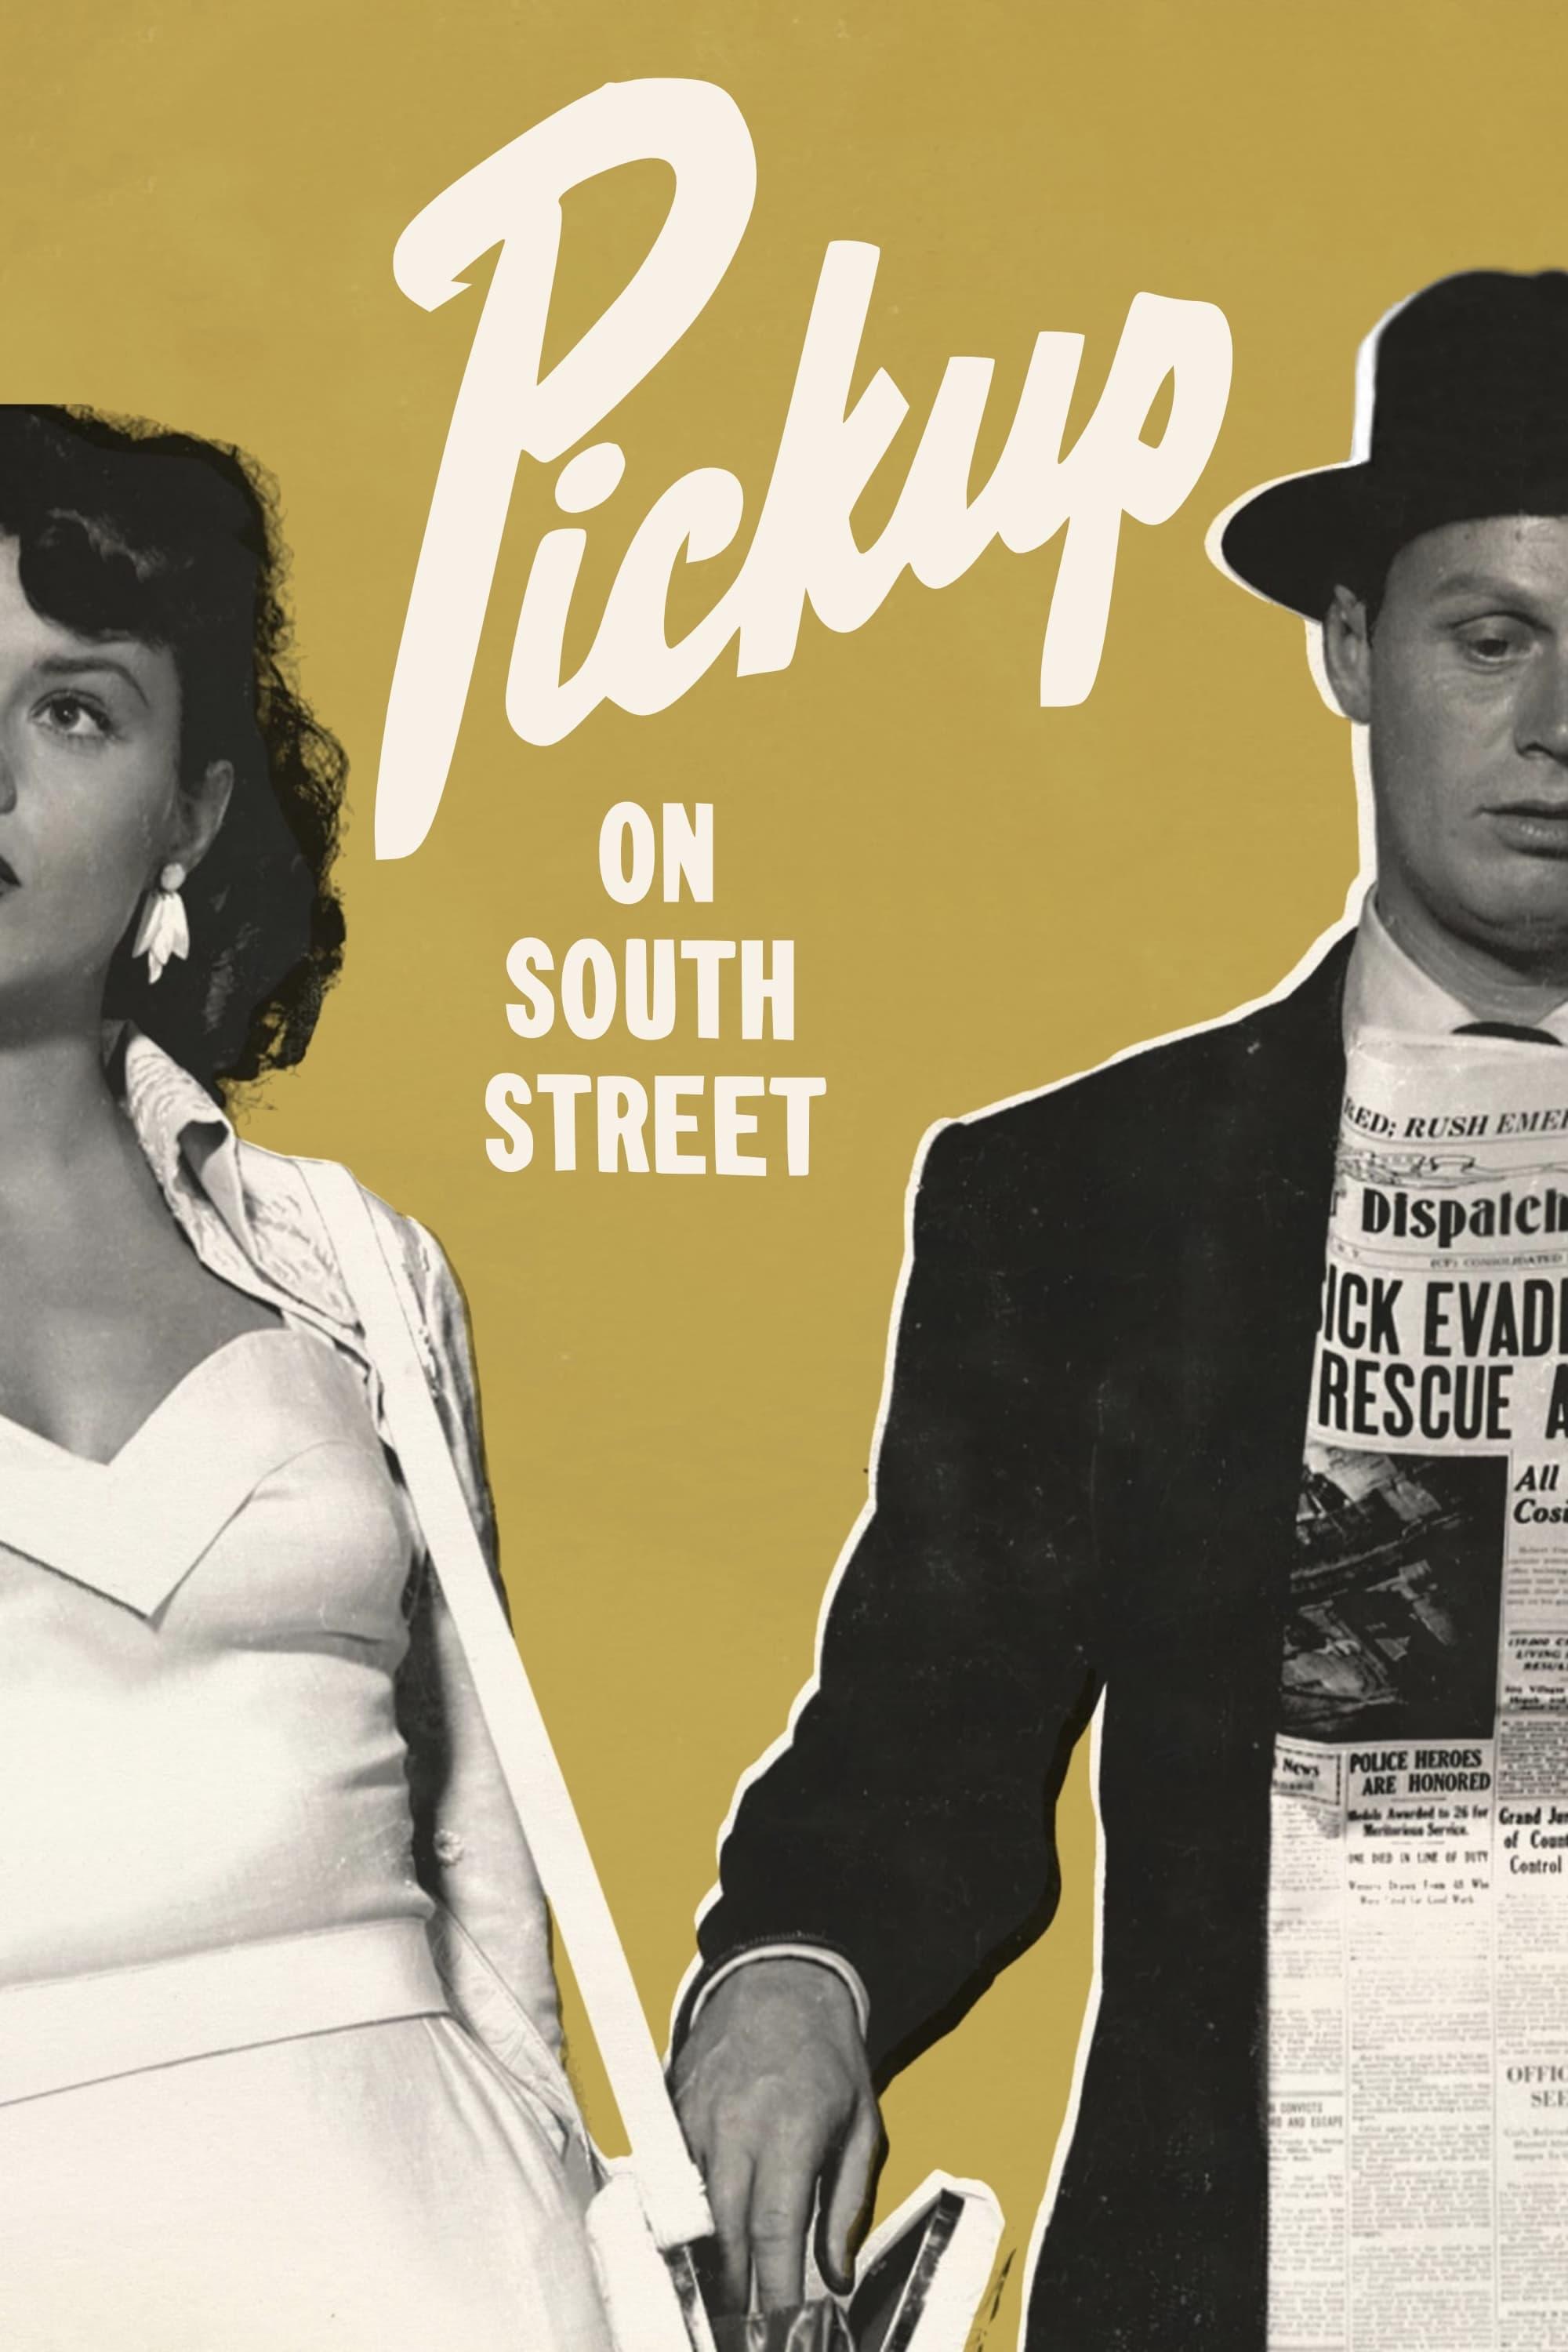 Pickup on South Street poster